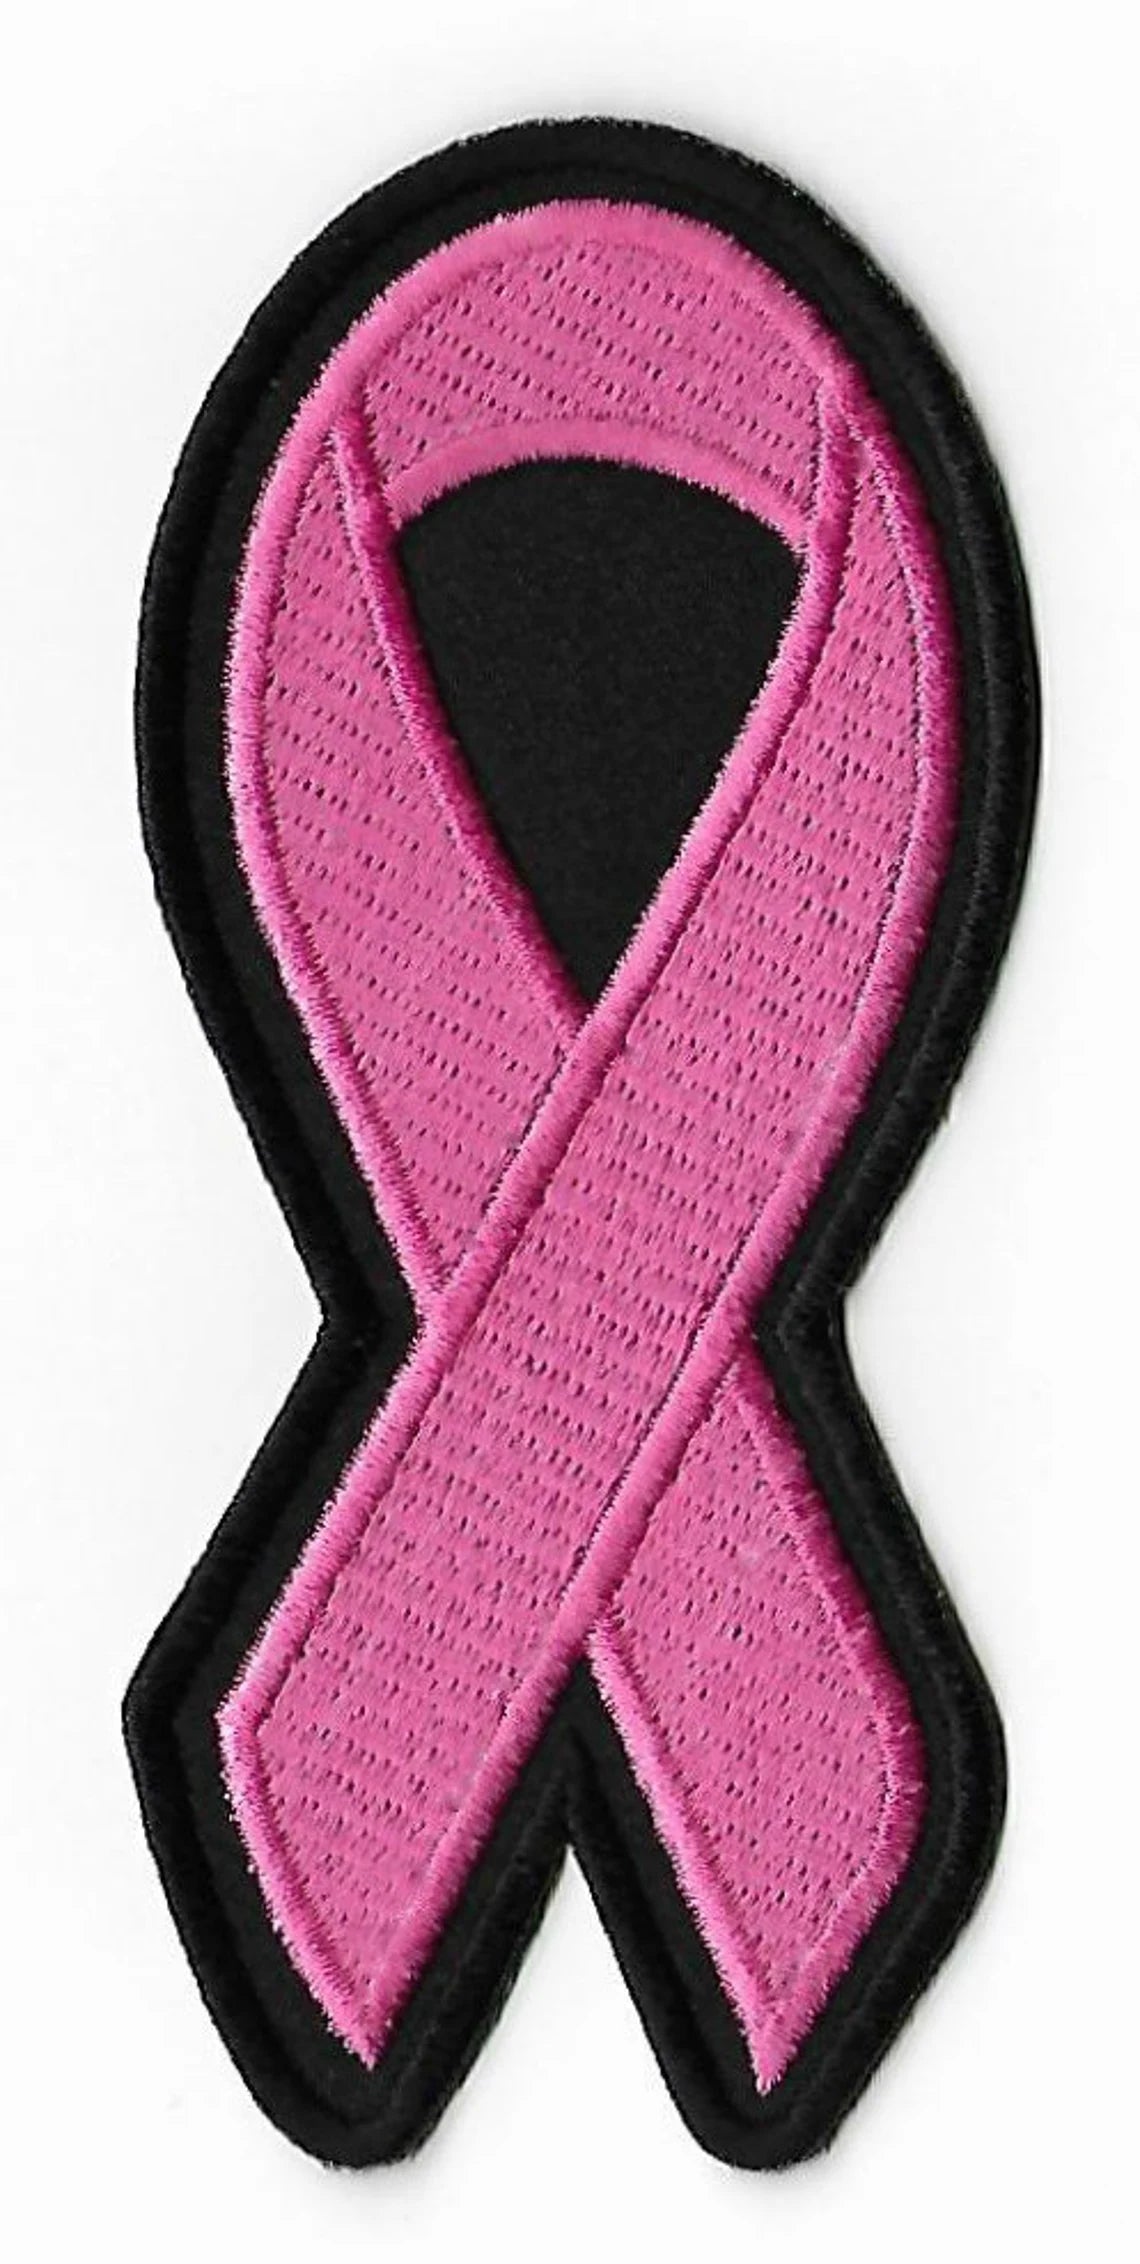 Pink Ribbon Breast Cancer Awareness Patch (4.5 Inch) Iron-on Badge Survivor